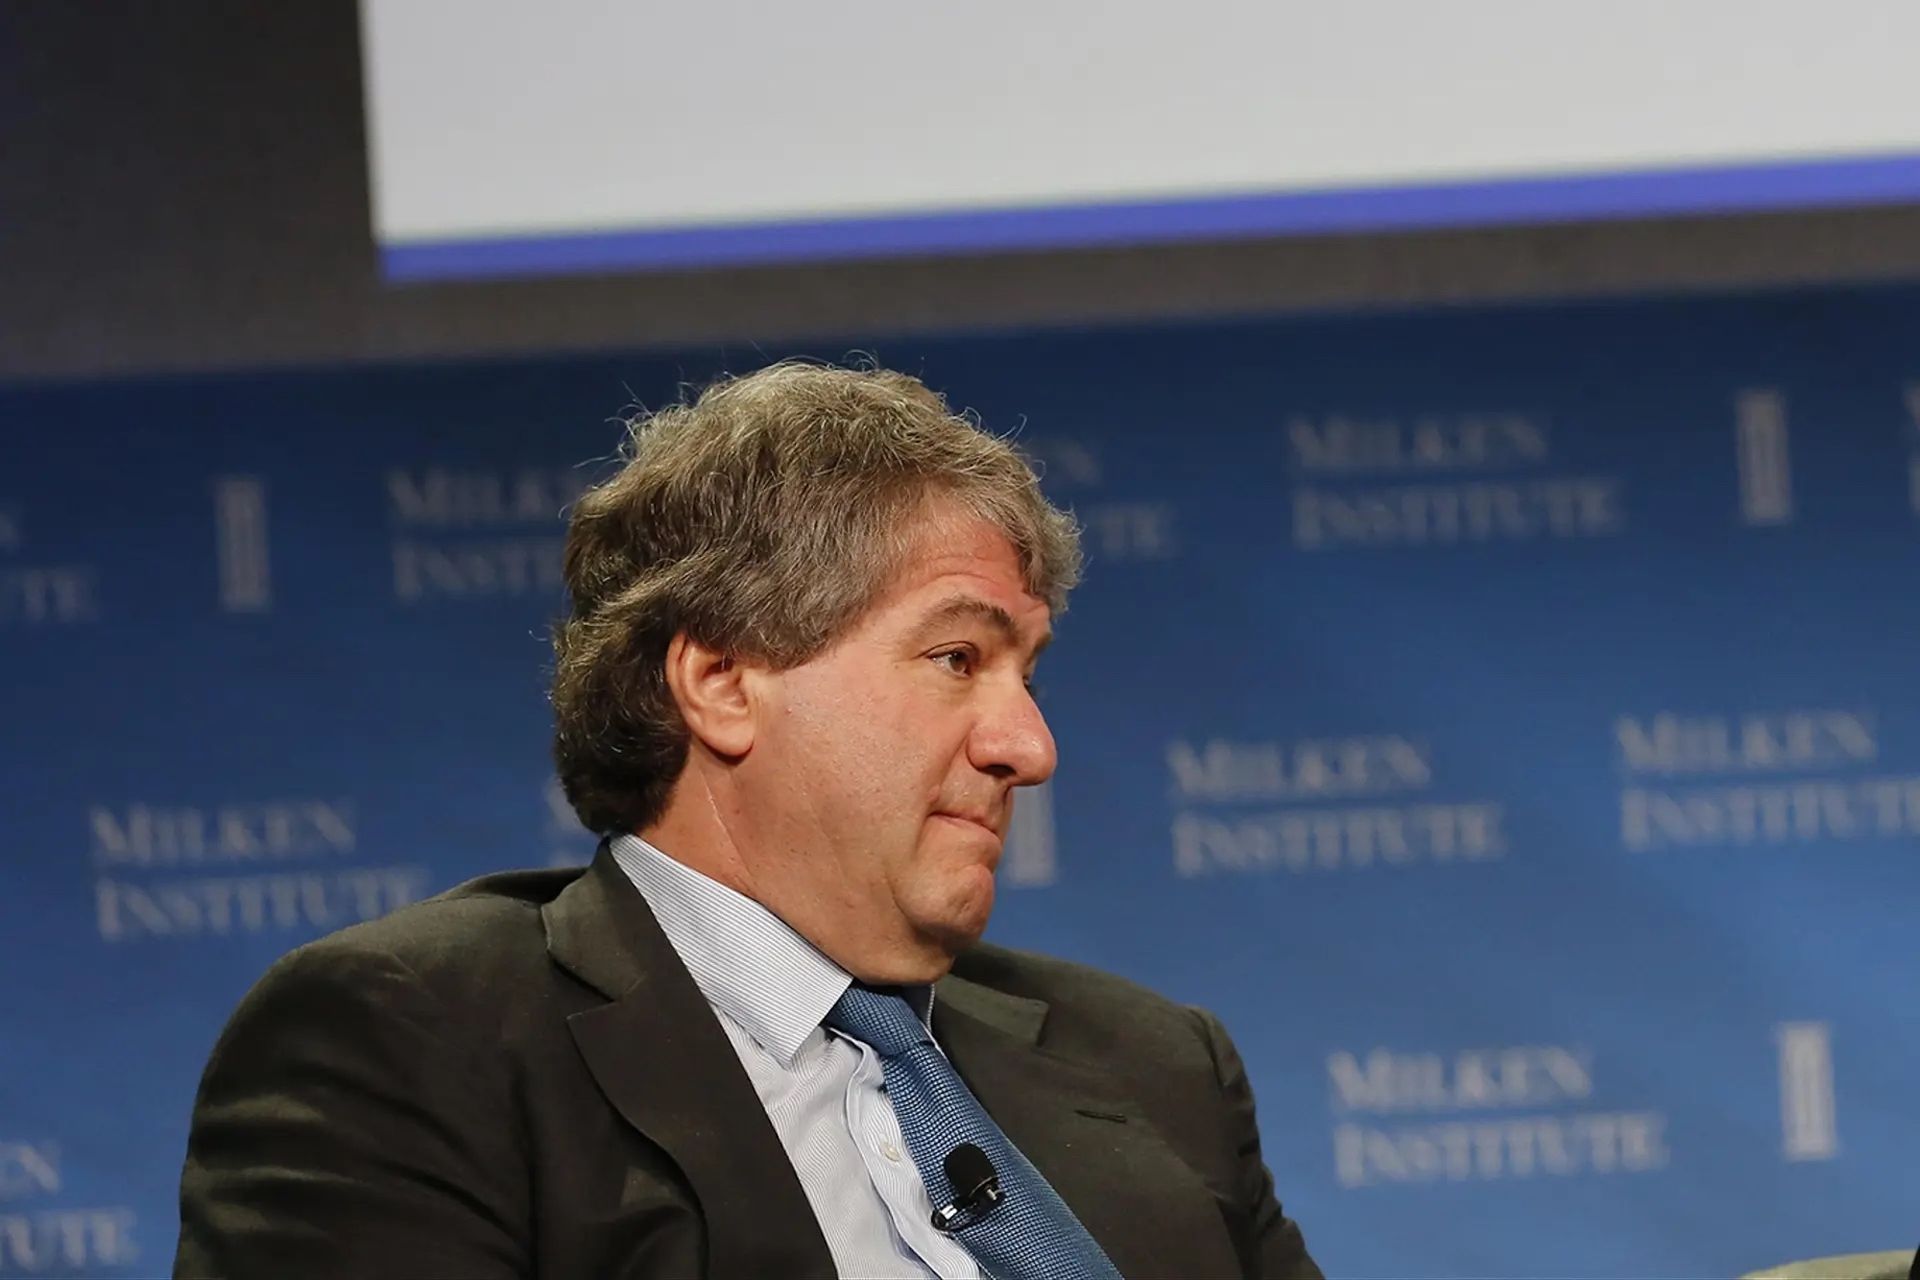 Leon Black, former chairman of the board at the Museum of Modern Art, resigned as chairman of the equity firm Apollo Global Management after his dealings with Jeffrey Epstein came to light ZUMA Press/Alamy Stock Photo